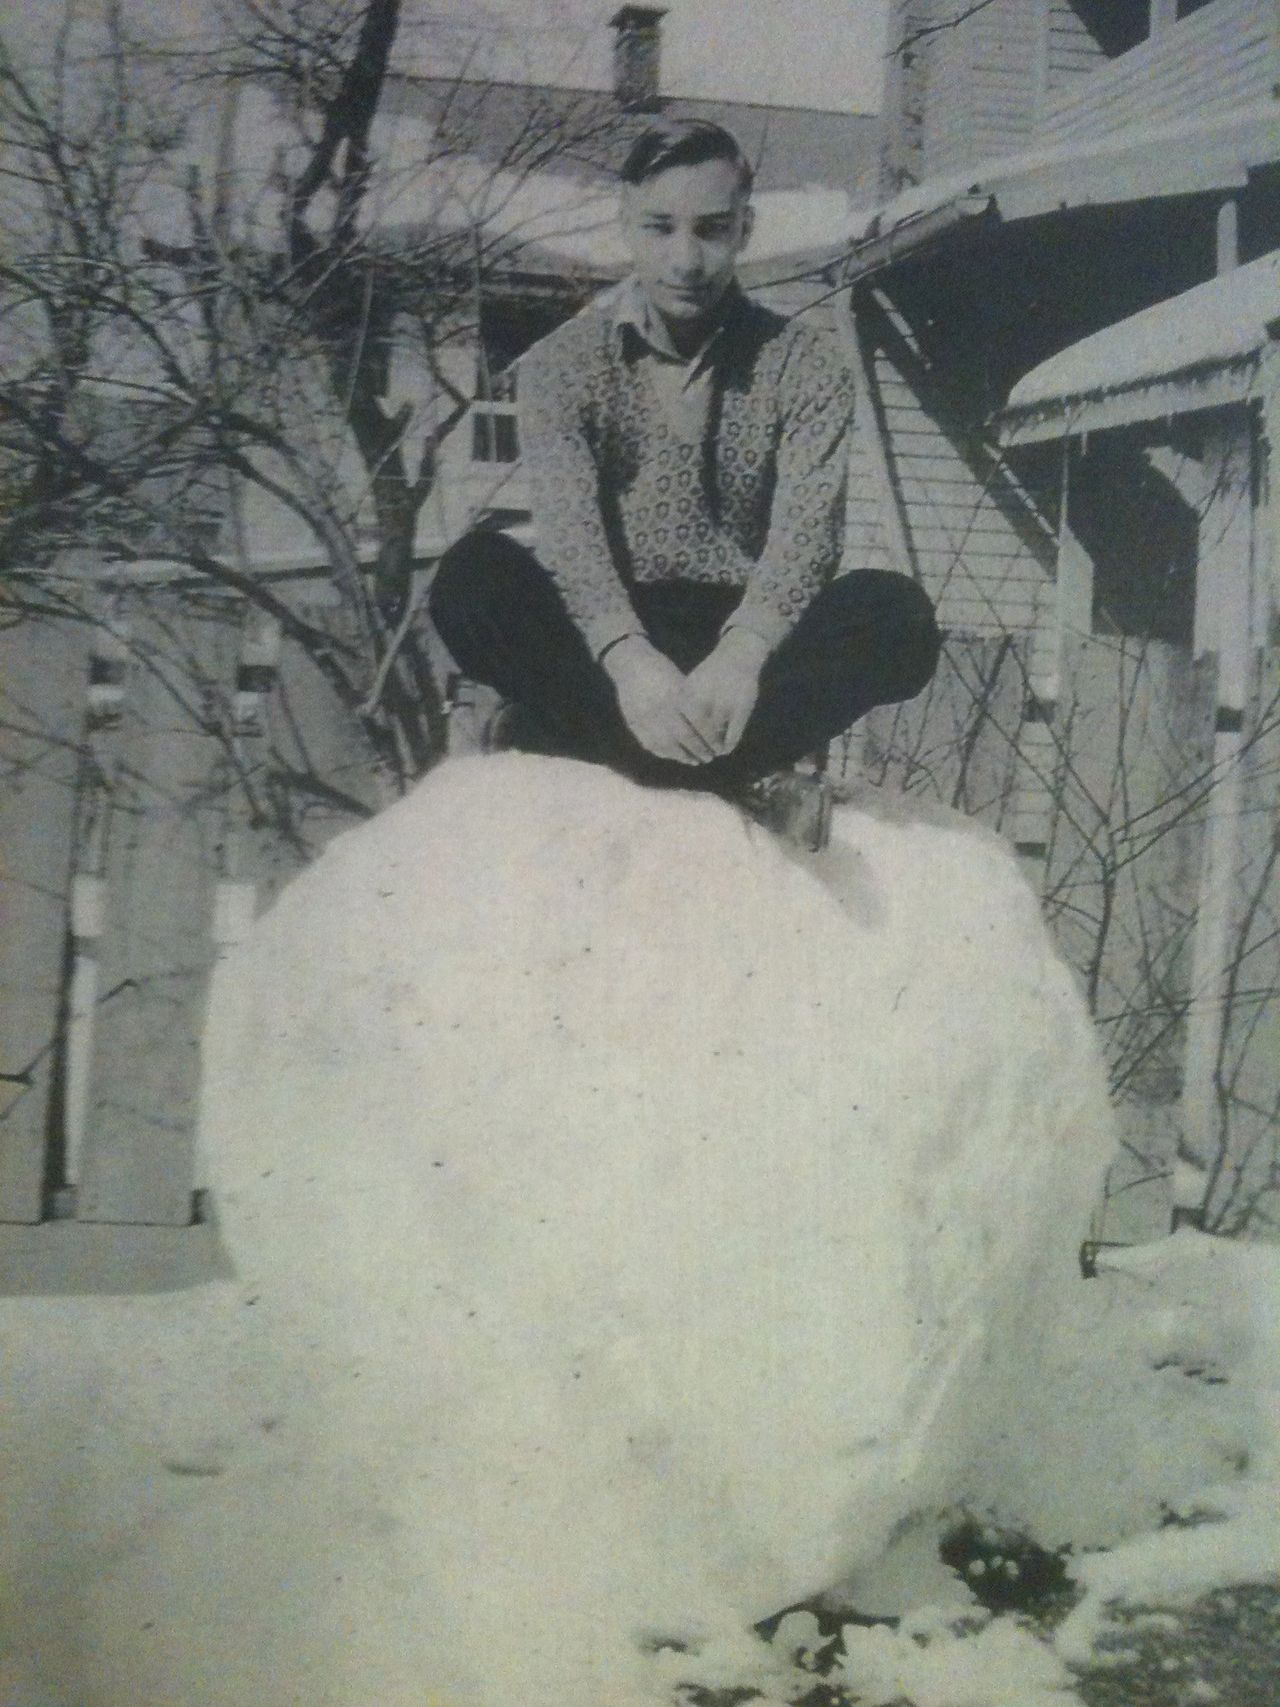 Josh's paternal grandfather sitting on a giant snowball